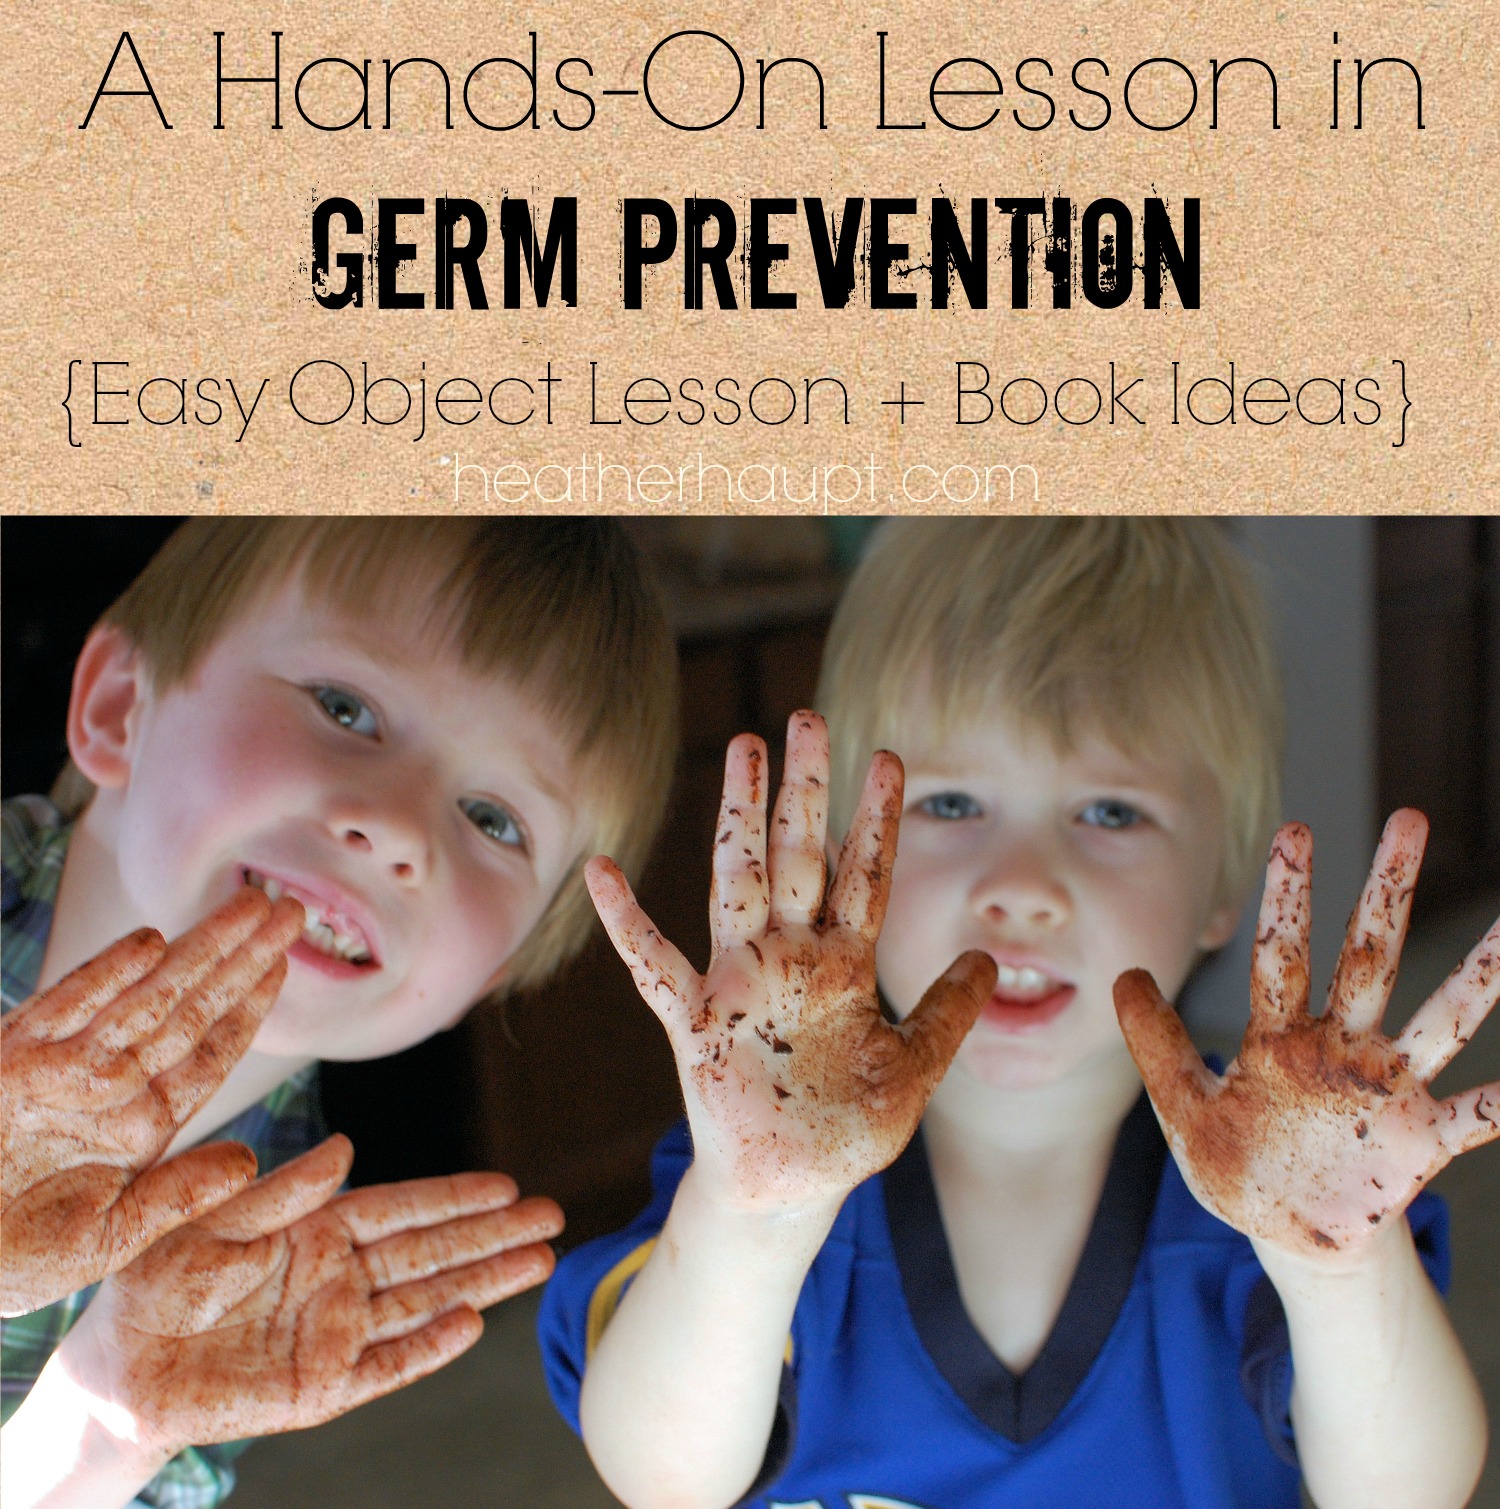 A fun and powerful object lesson to help kids understand the importance of hand washing!